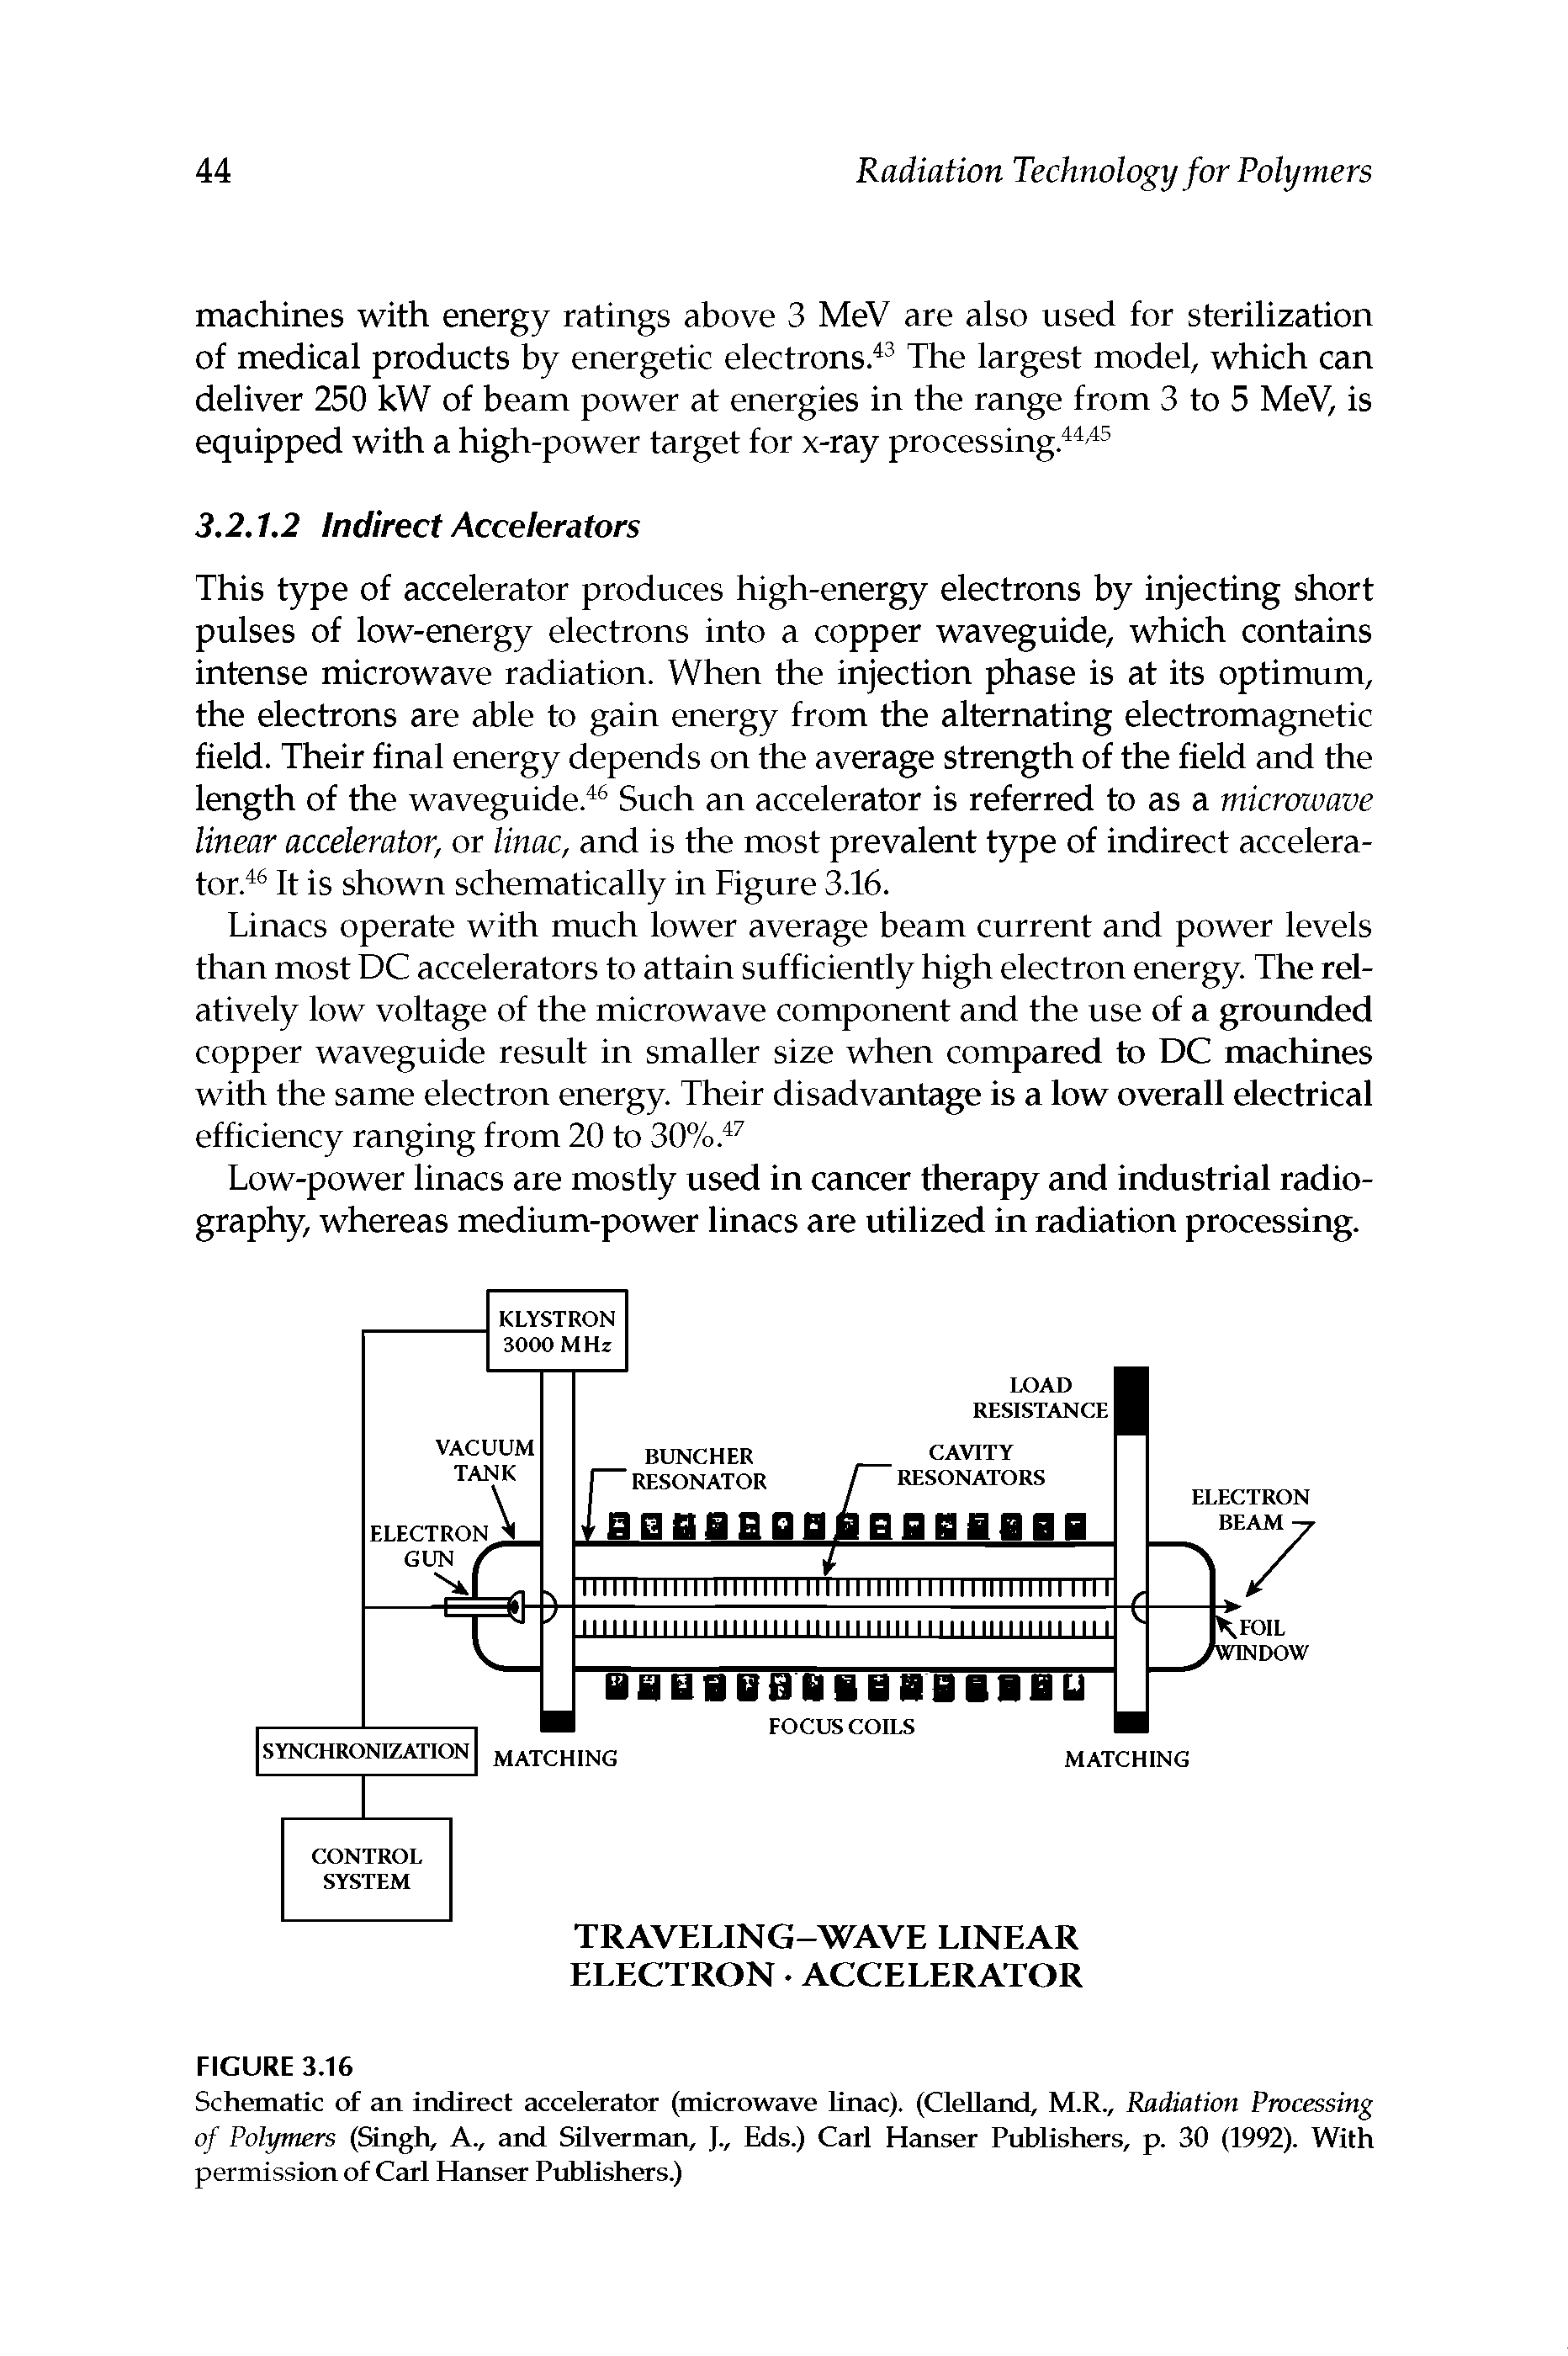 Schematic of an indirect accelerator (microwave Hnac). (CleUand, M.R., Radiation Processing of Polymers (Singh, A., and Silverman, Eds.) Carl Hanser Publishers, p. 30 (1992). With permission of Carl Hanser Publishers.)...